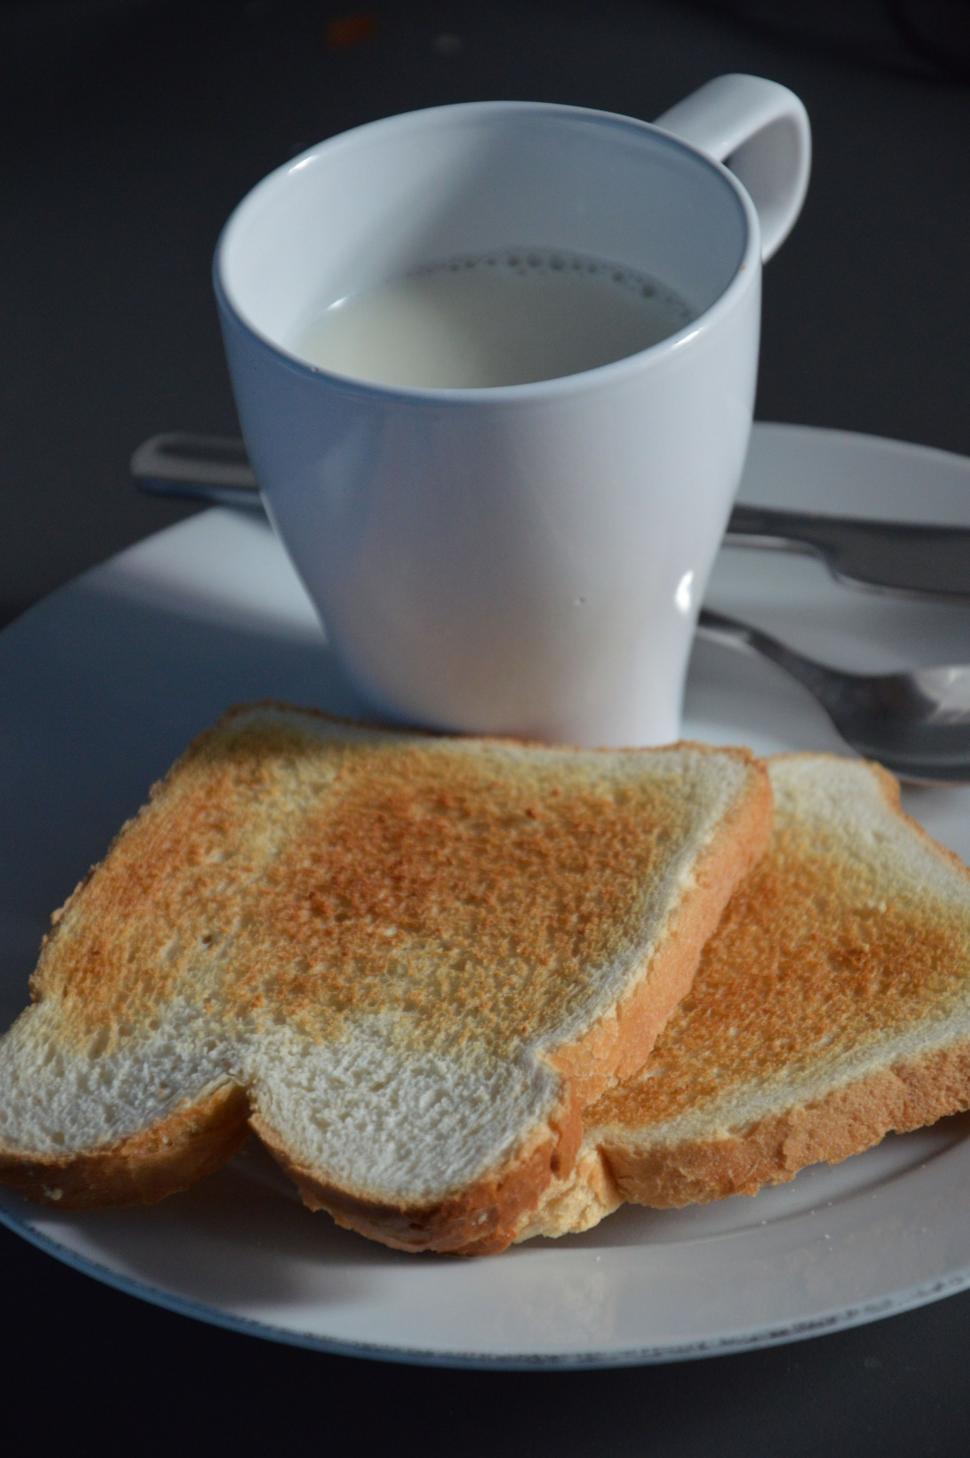 Free Image of Breakfast with bread and milk  